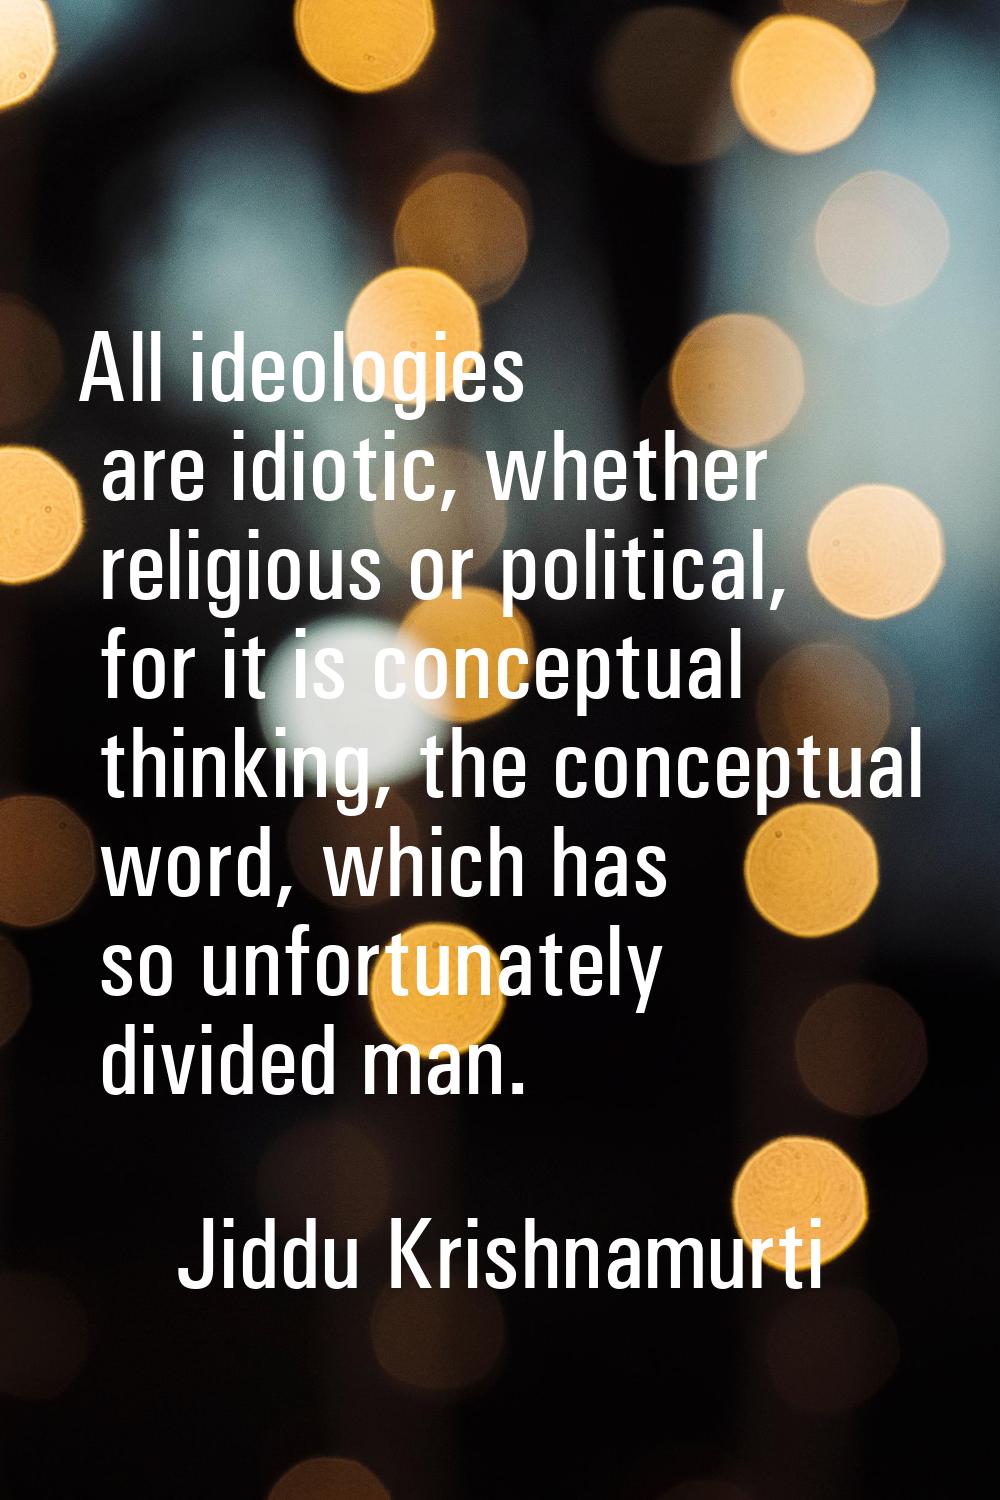 All ideologies are idiotic, whether religious or political, for it is conceptual thinking, the conc